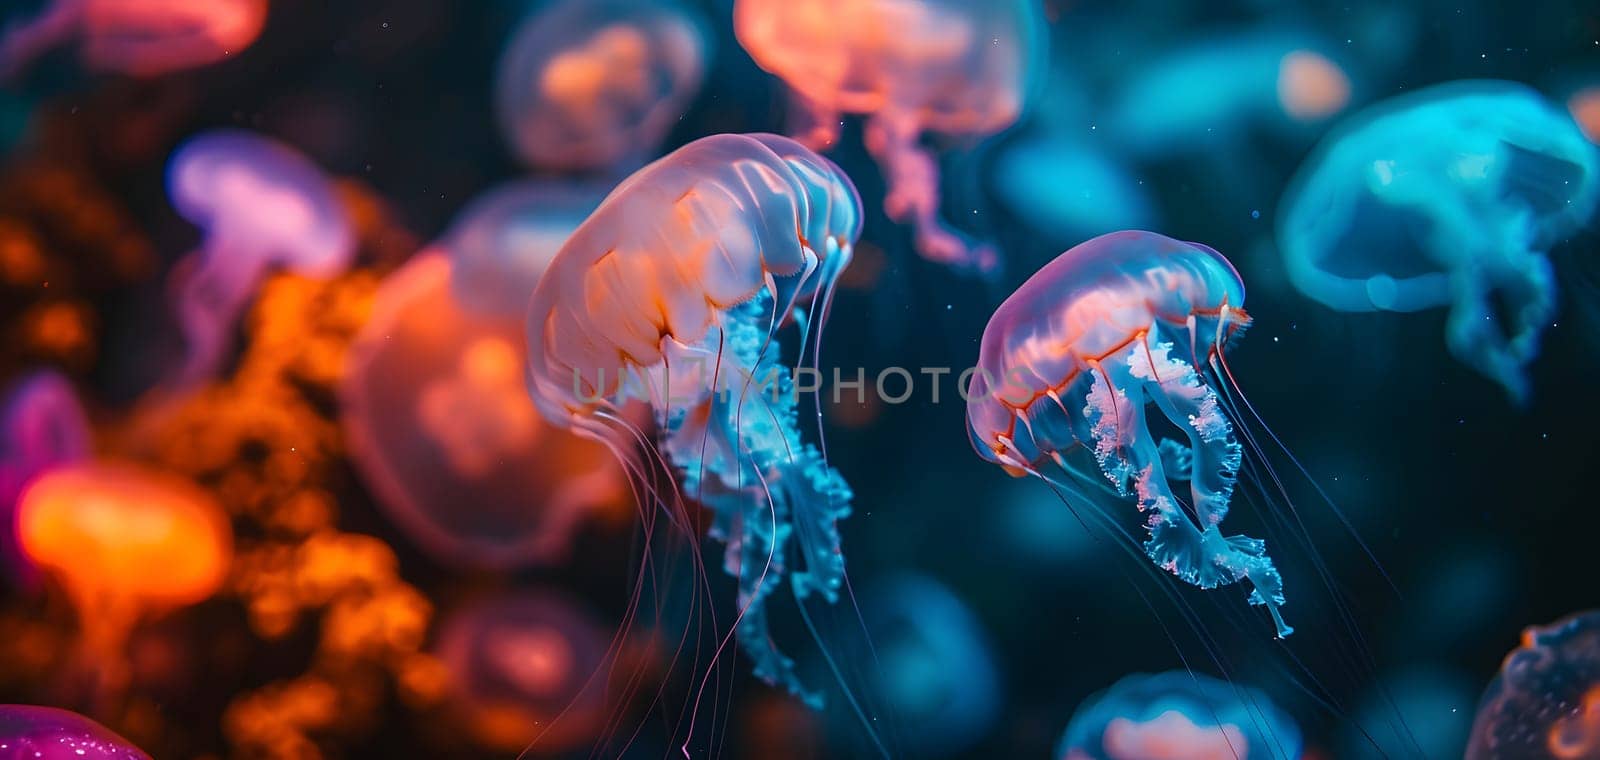 glowing sea jellyfishes on dark background, neural network generated image by z1b